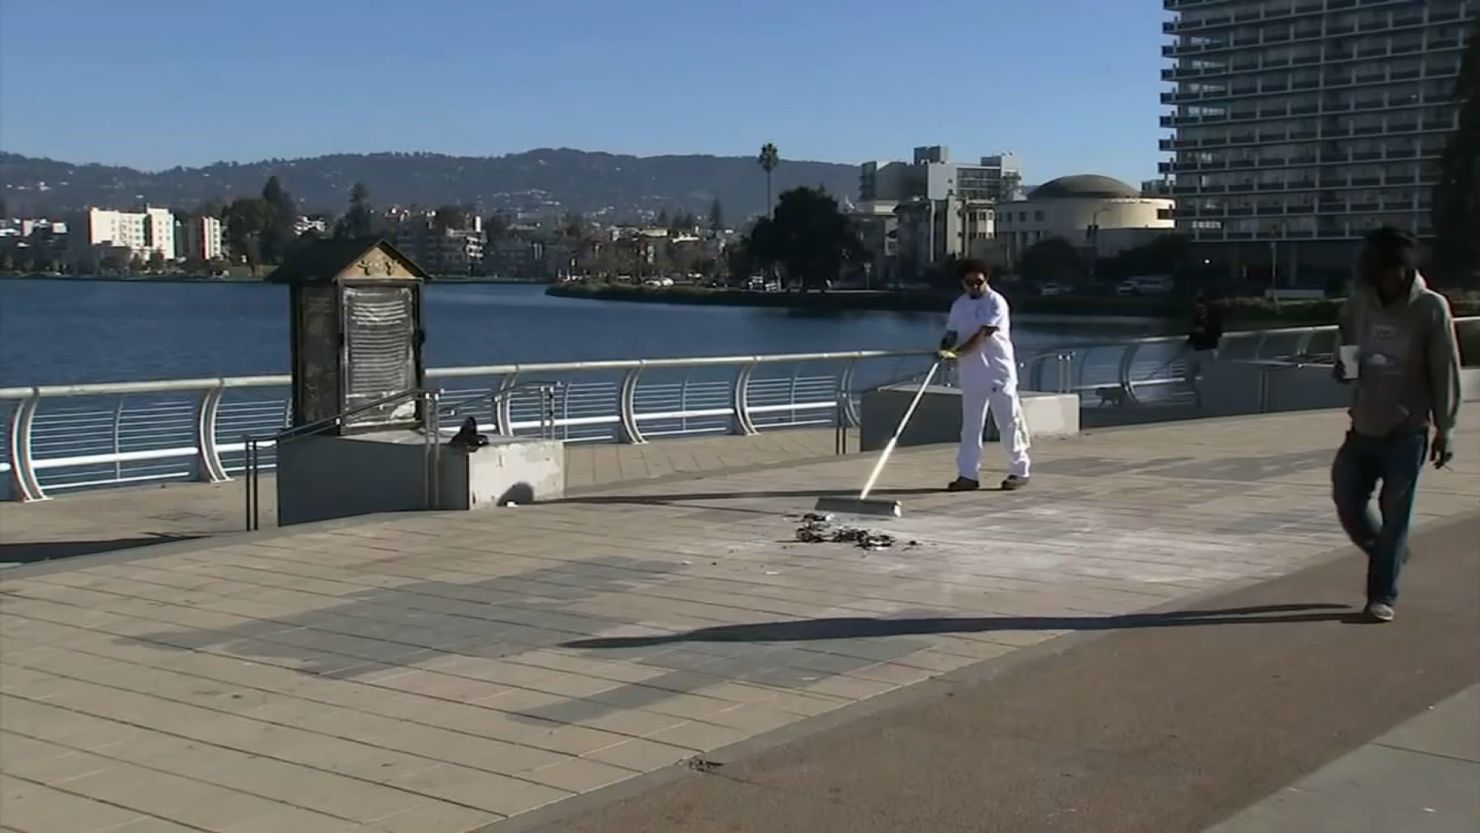 A worker cleans up the site of a destroyed menorah thrown into Lake Merritt in Oakland, California.